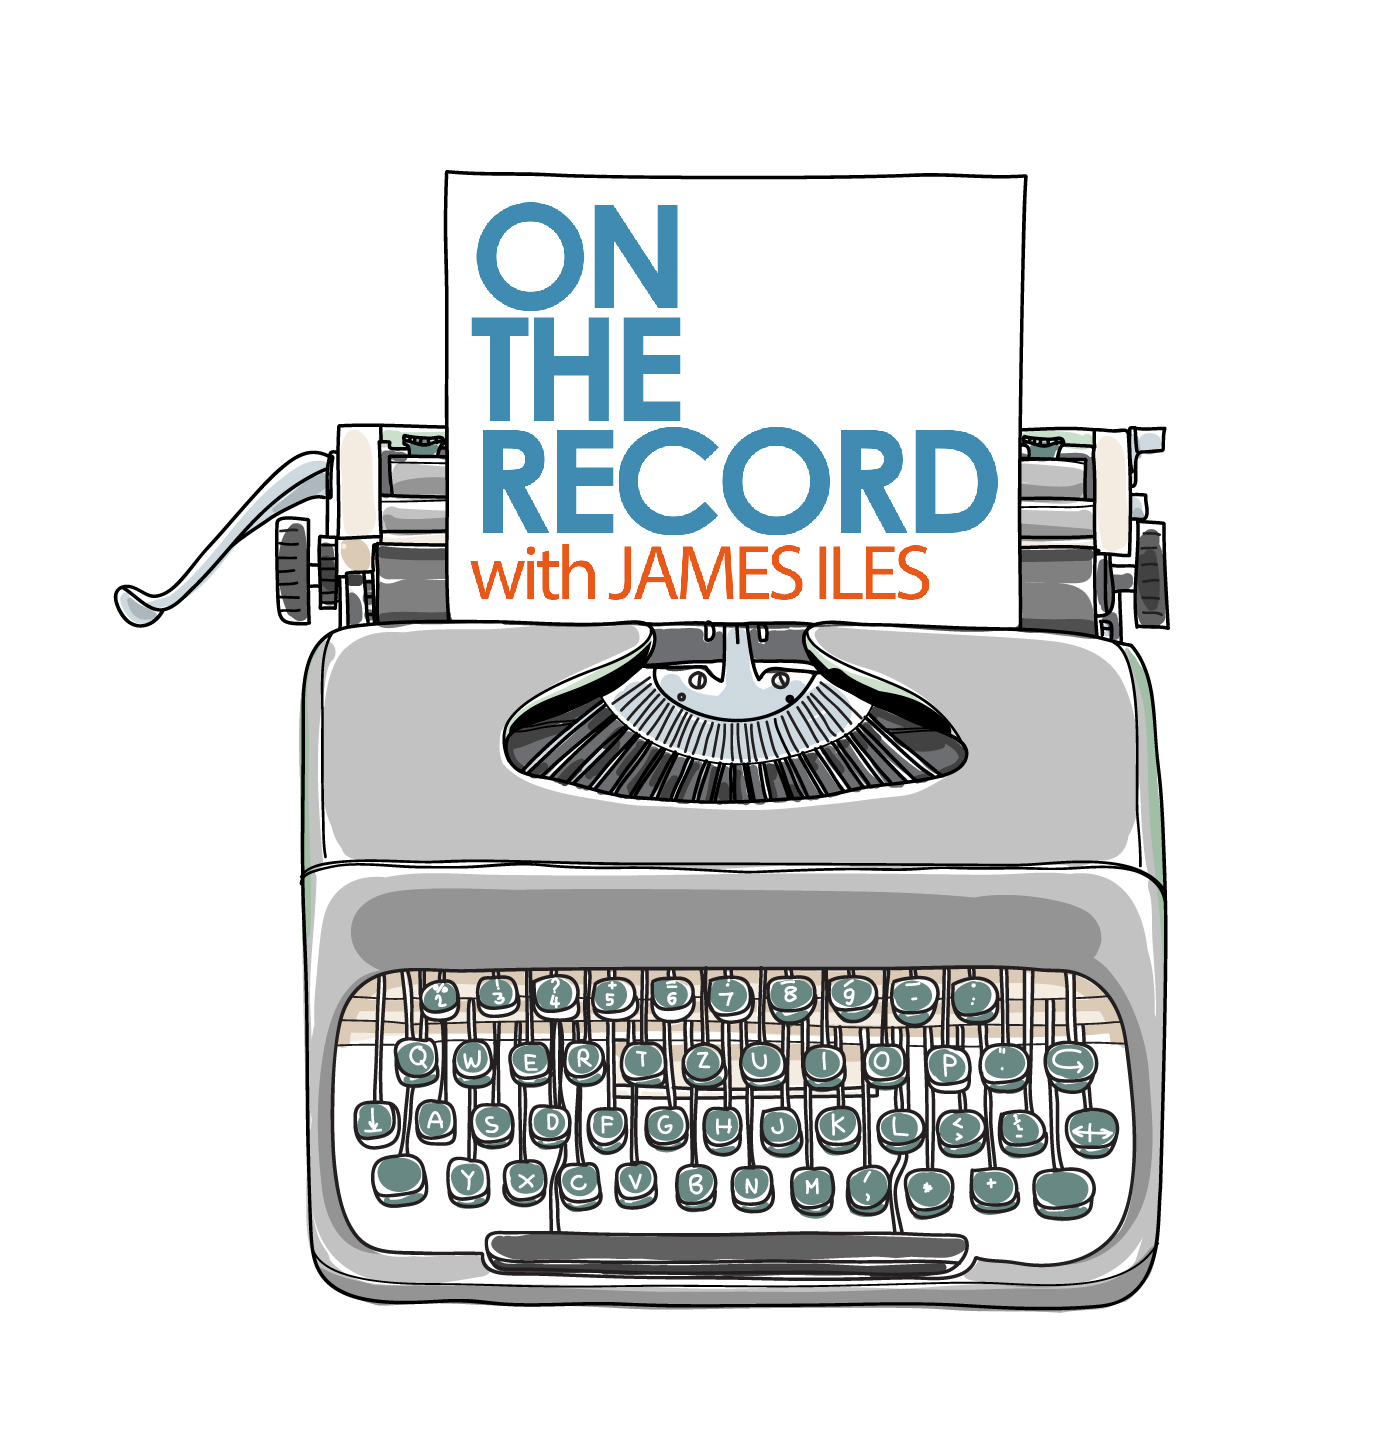 On the Record: Pulley.com